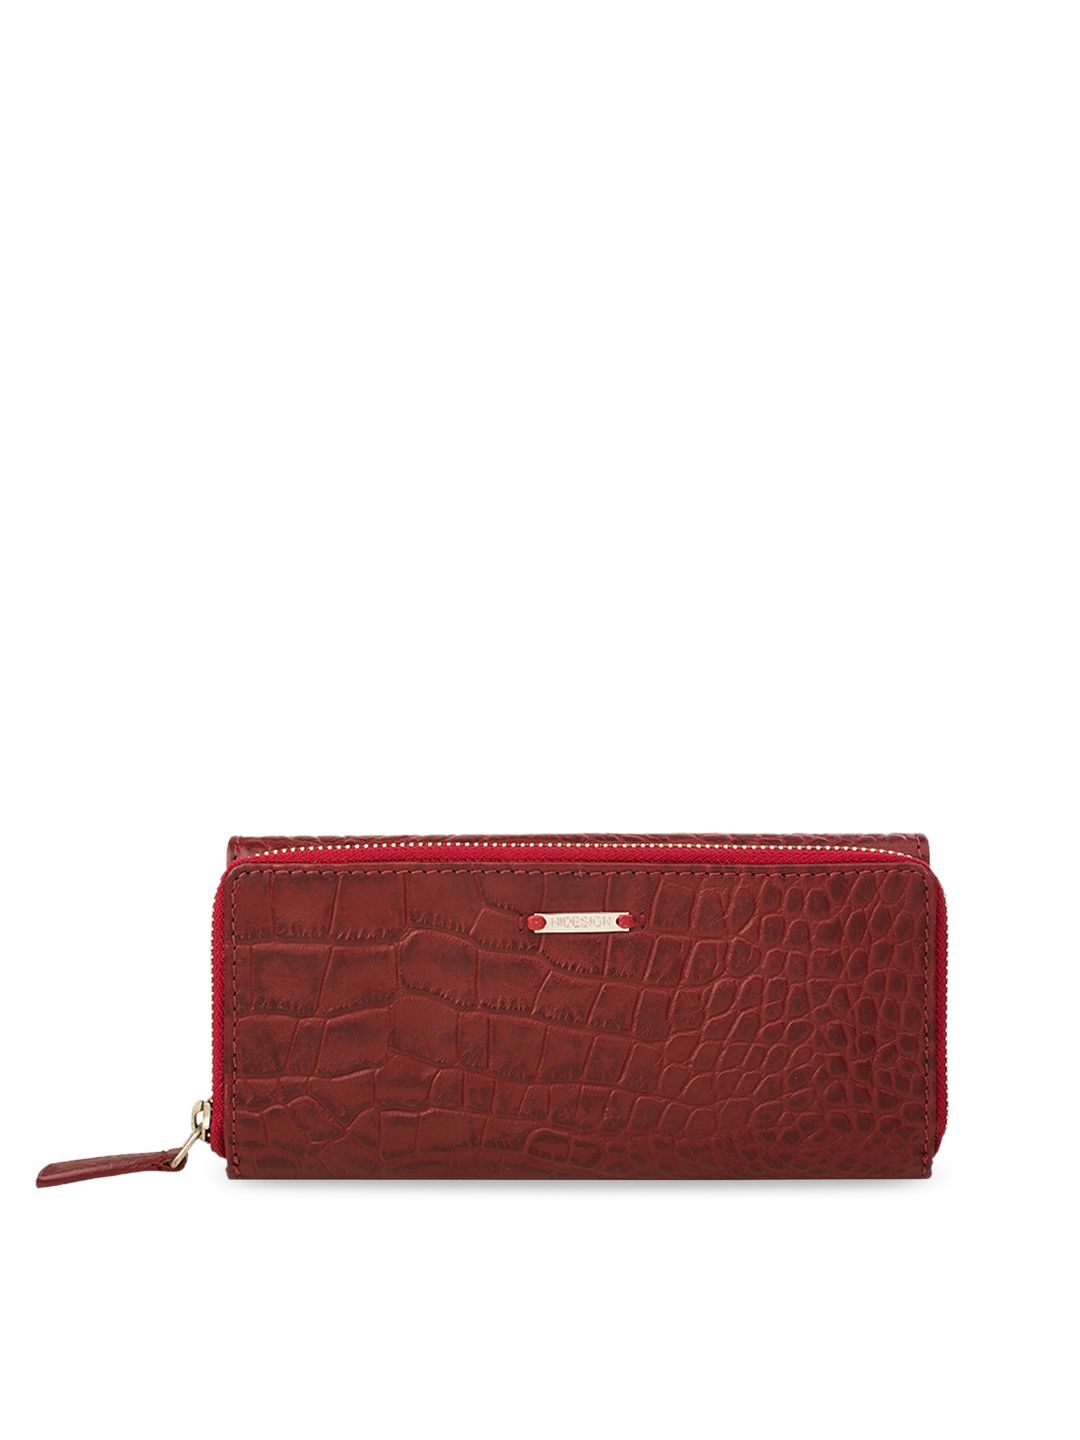 Hidesign Women Red Textured Leather Three Fold Wallet Price in India